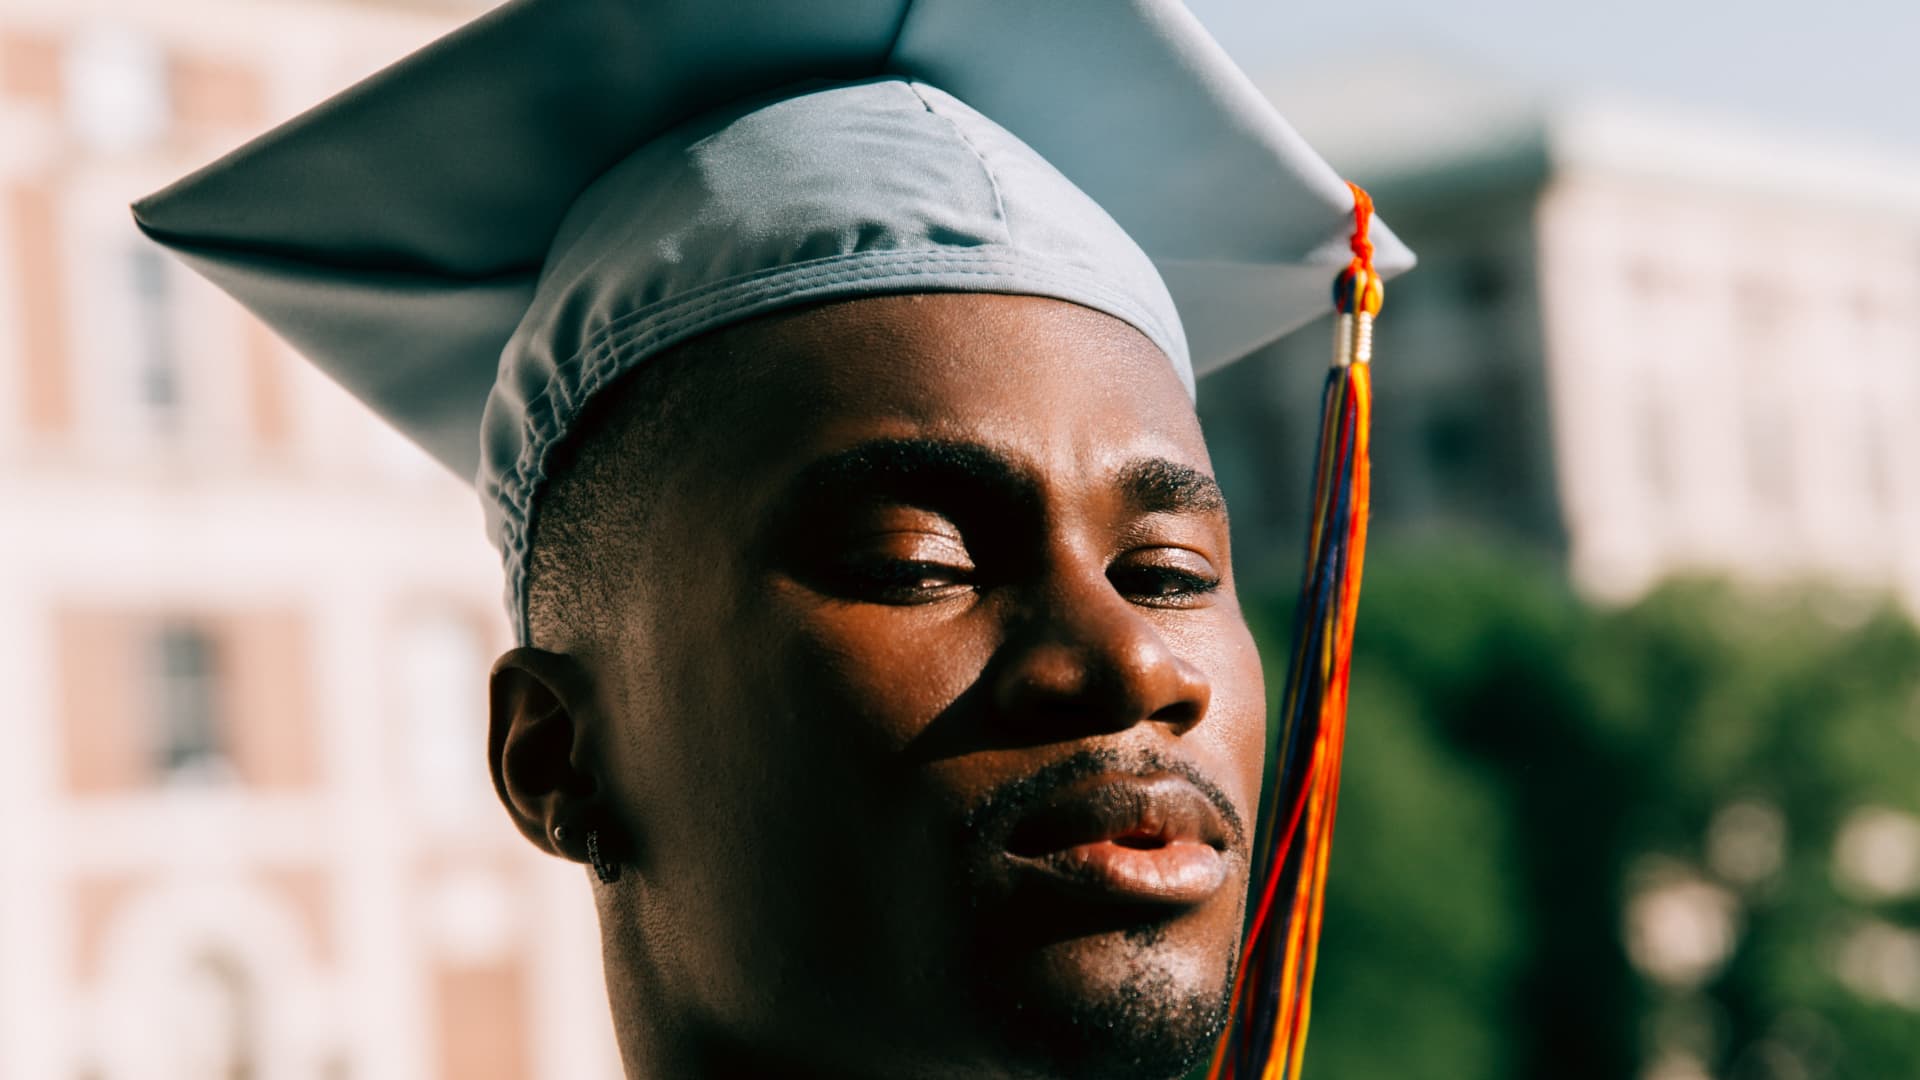 Tyrese Thomas graduated college in May 2022. He put a priority on companies that shared his values during his job search.